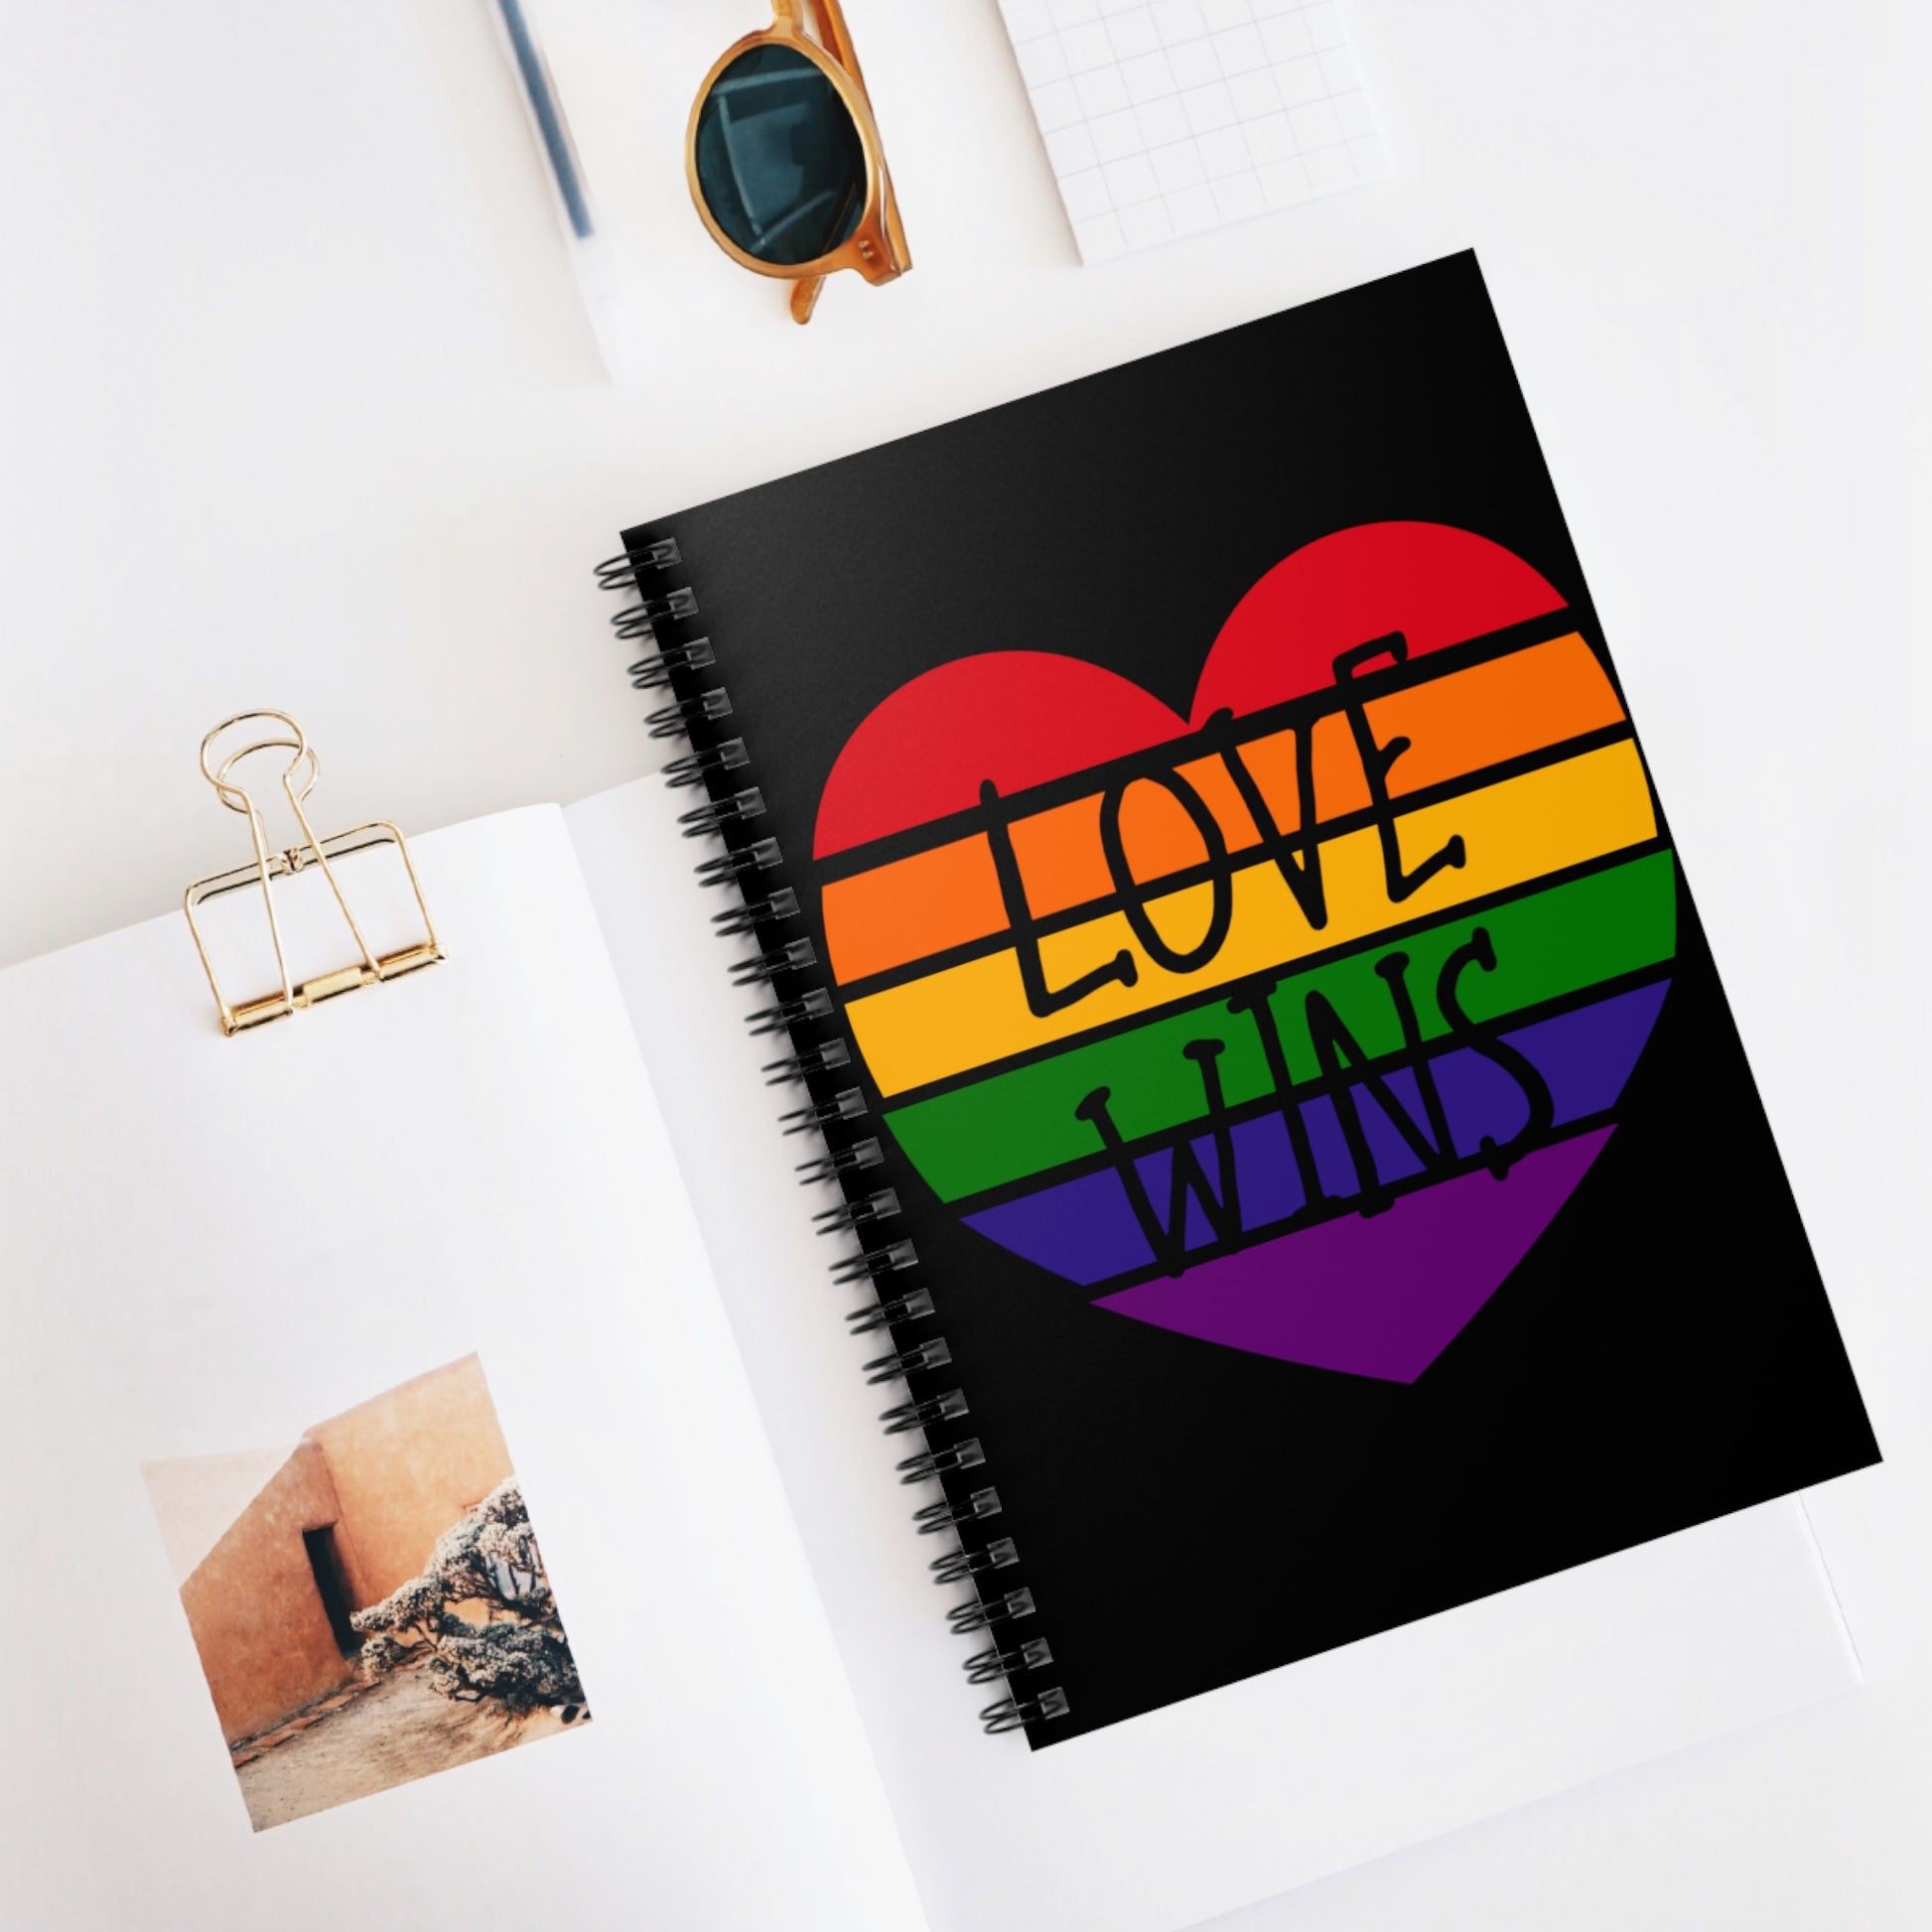 Love Wins: Spiral Notebook - Log Books - Journals - Diaries - and More Custom Printed by TheGlassyLass